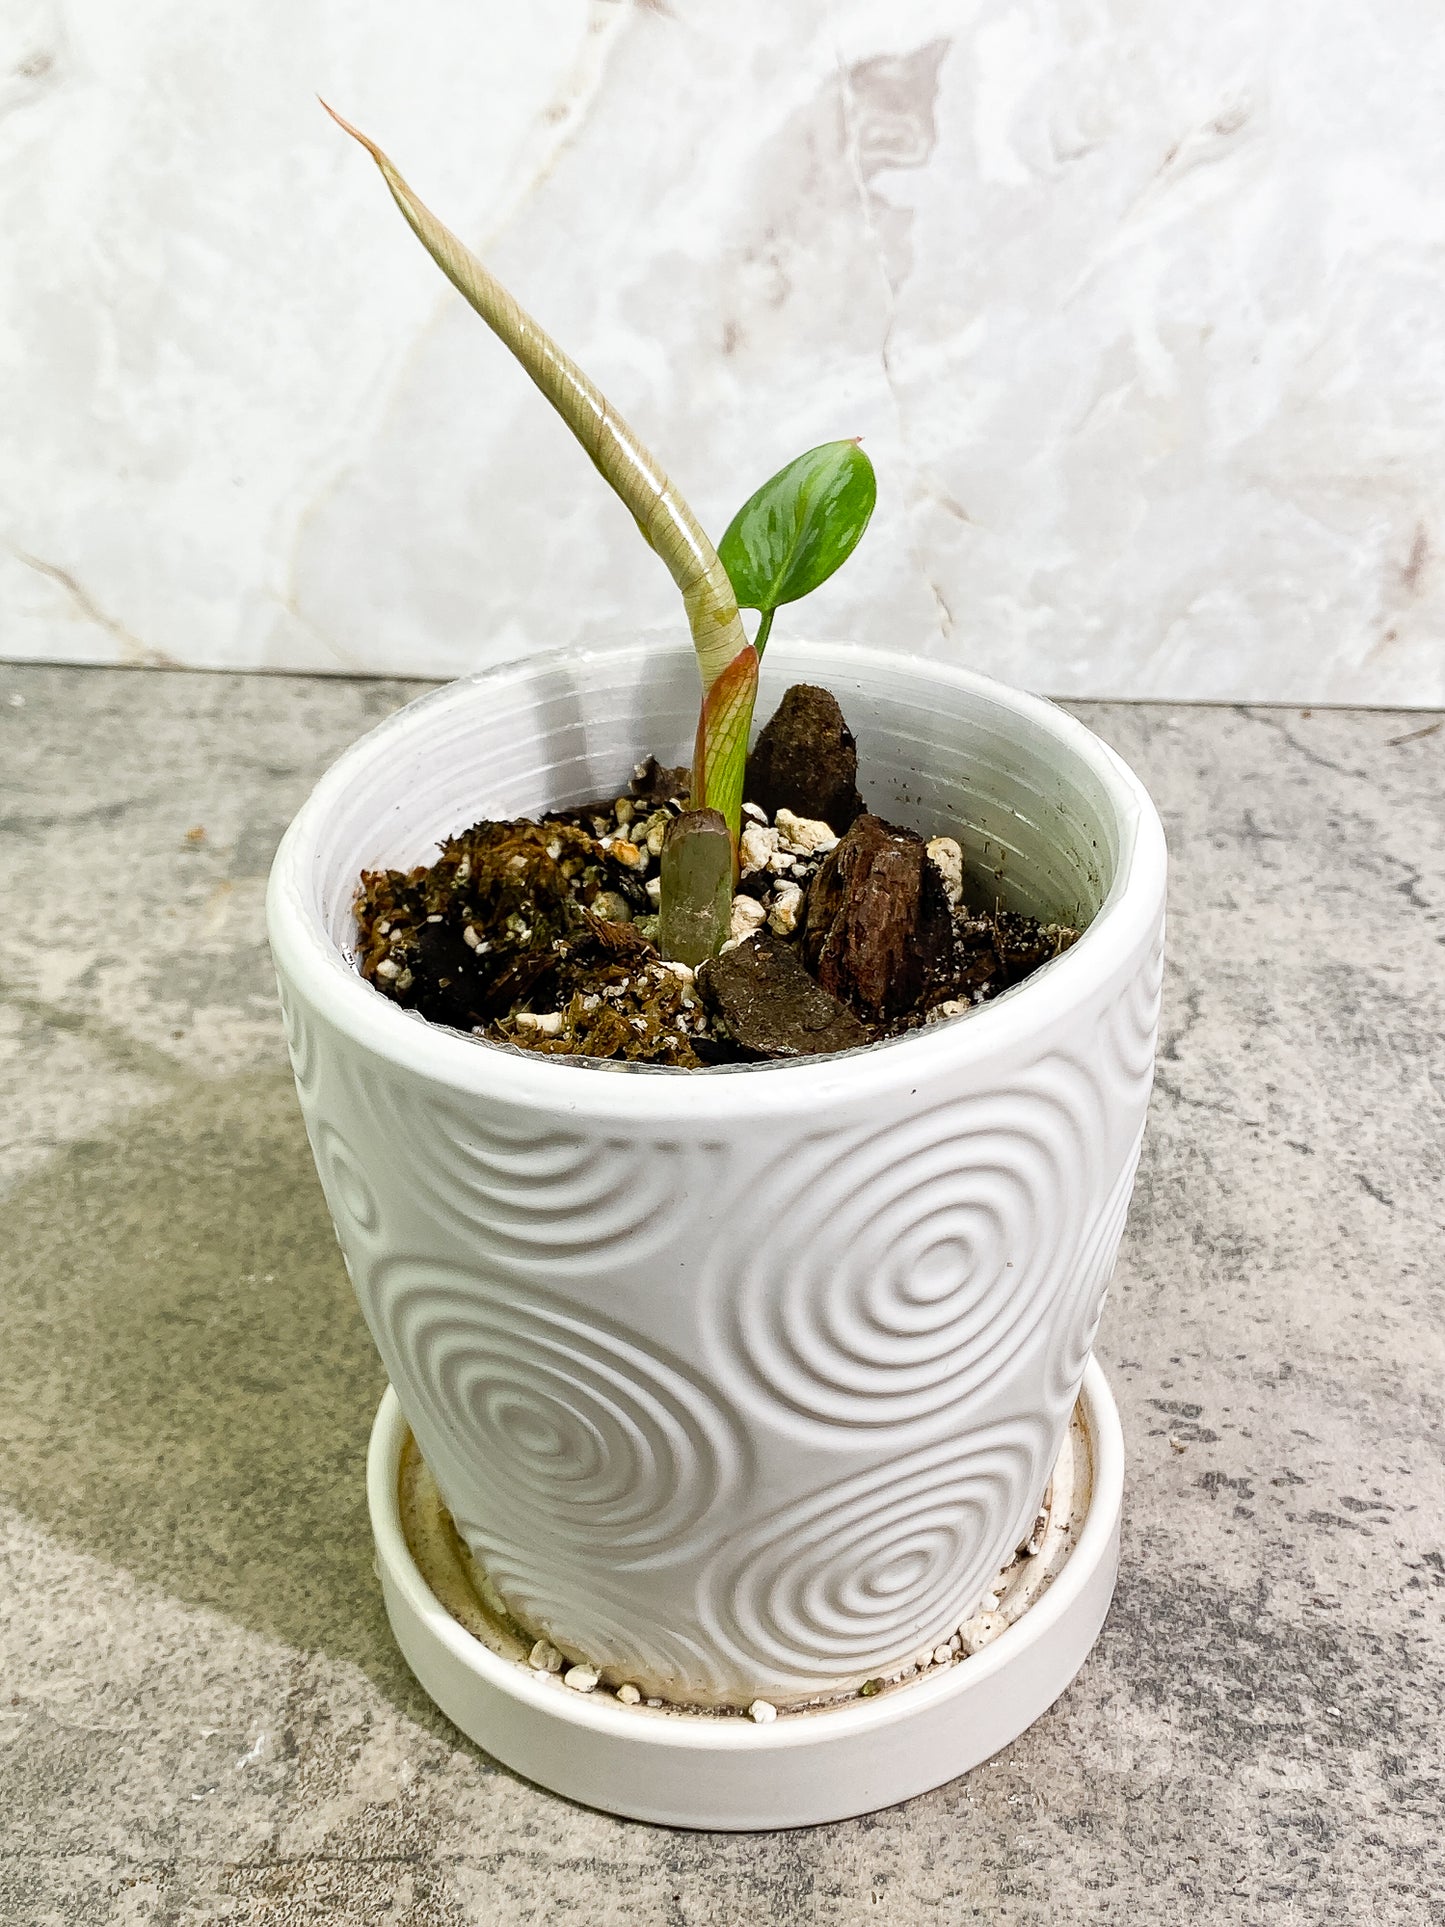 Philodendron Sodiroi 1 leaf 1 sprout fully rooted